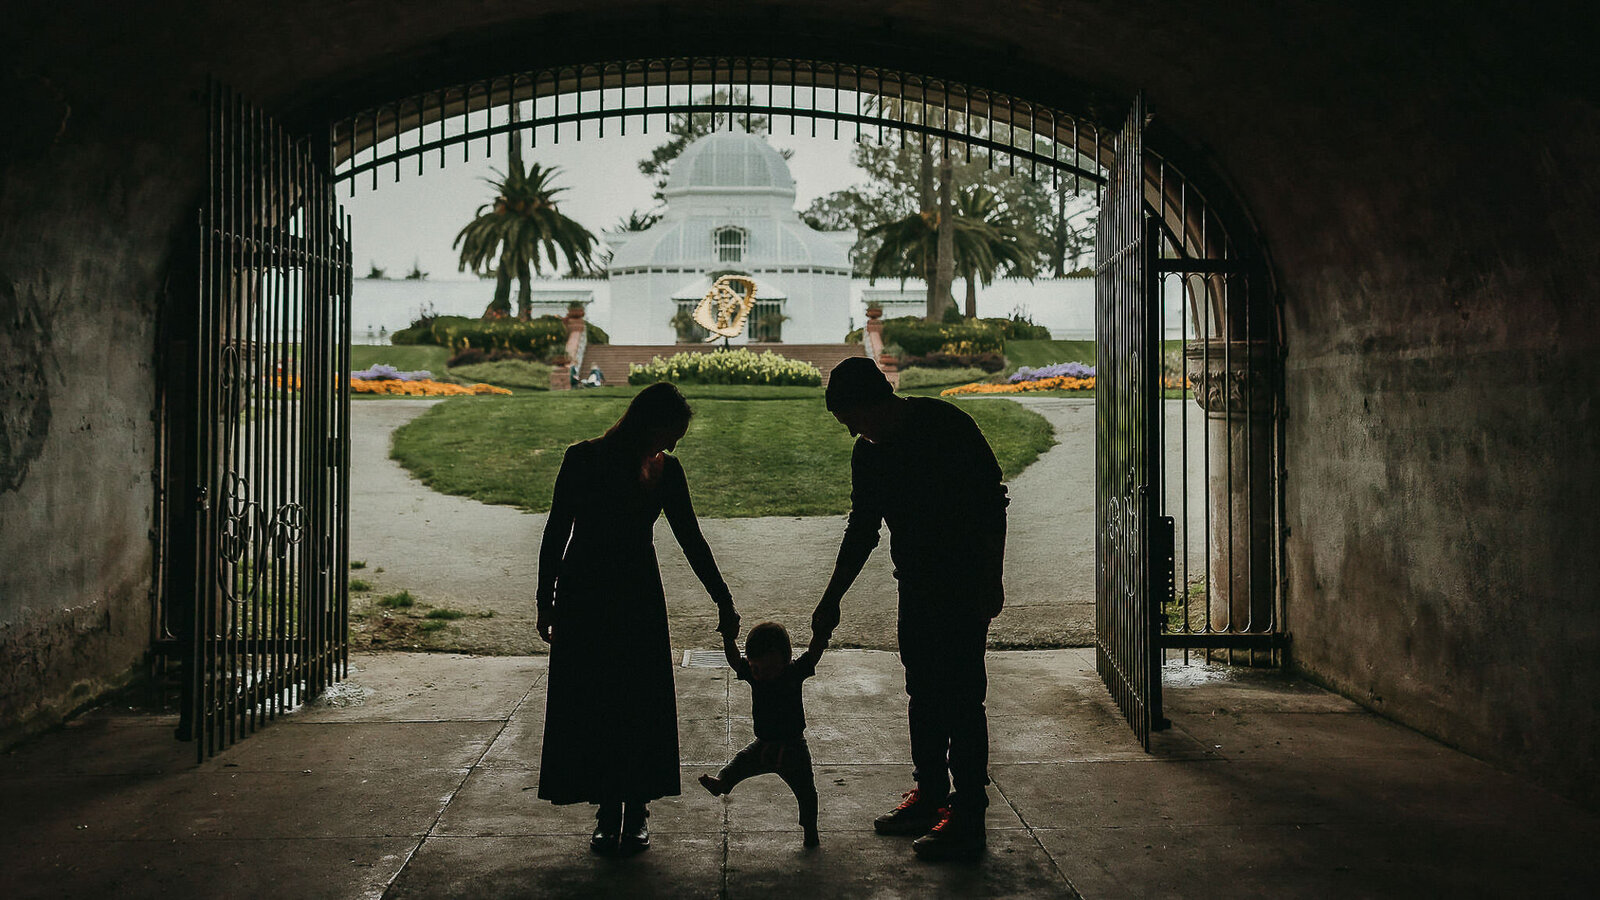 Silhouette of family holding hands and toddler walking at conservatory of flowers in SF